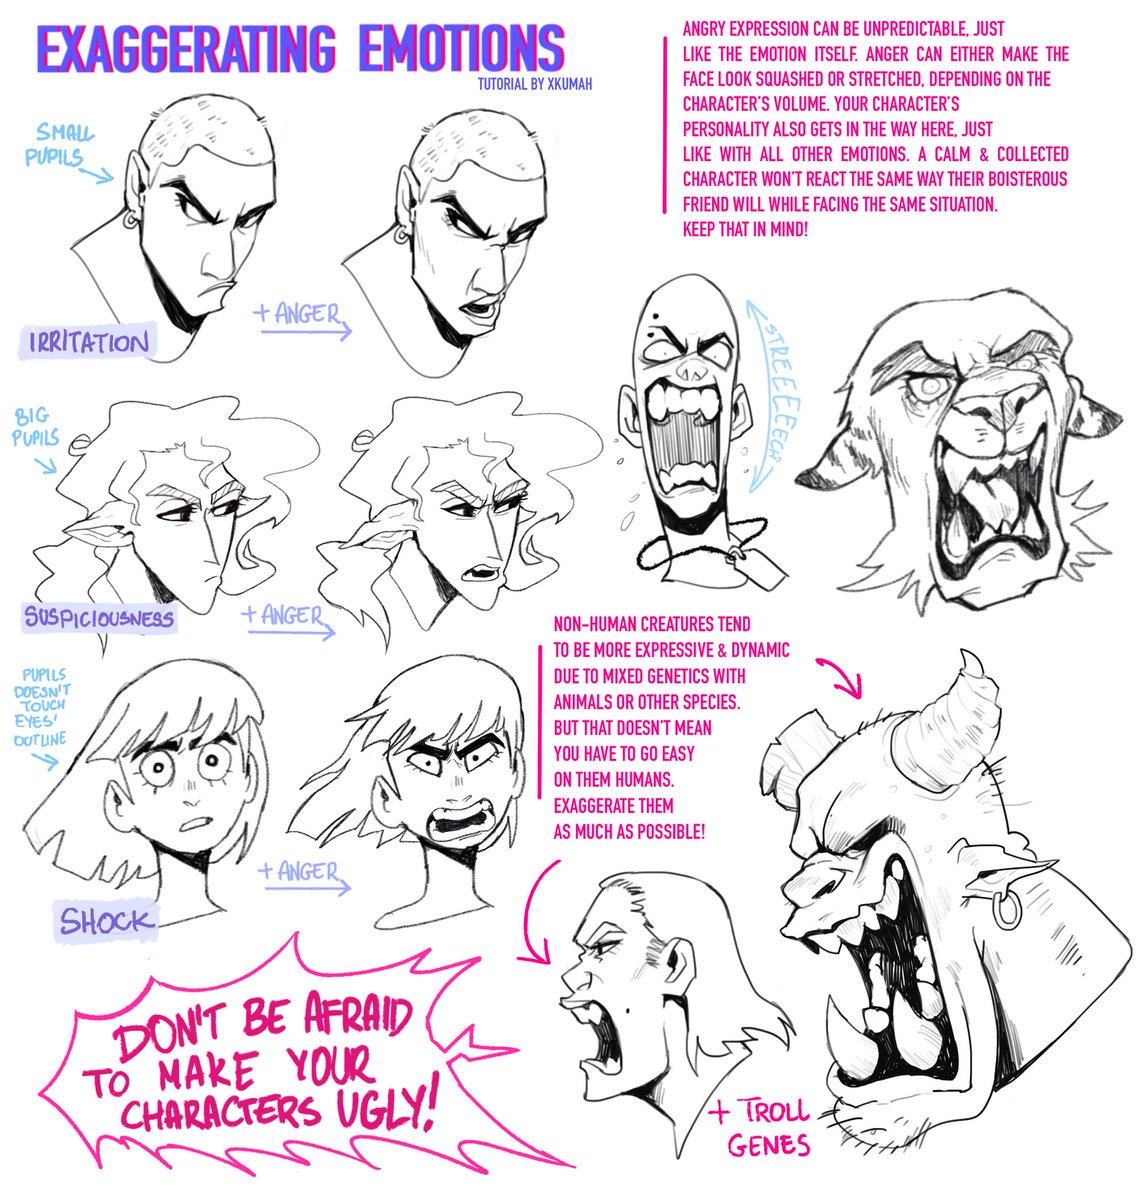 Hi there!✨
Here's my first tutorial for facial expressions. I want to create more of those for each expression that comes to mind!
This one is for Anger!
I hope somebody will find it even a little helpful! ?? 